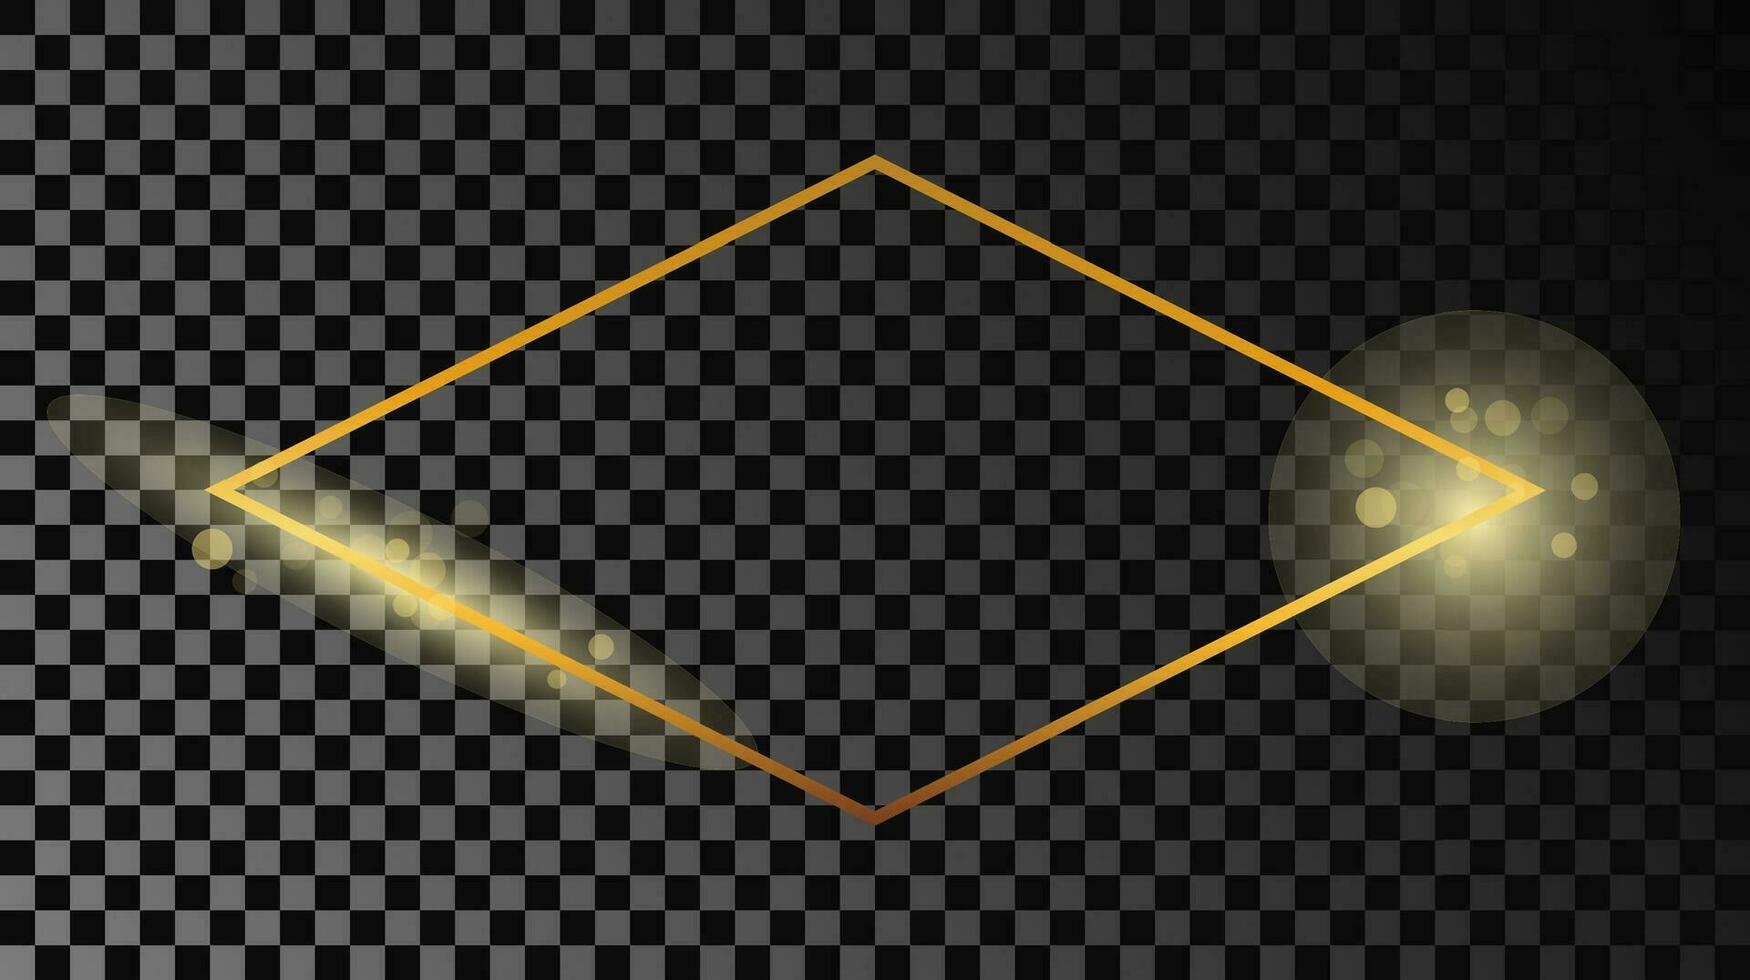 Gold glowing rhombus  shape frame isolated on dark background. Shiny frame with glowing effects. Vector illustration.